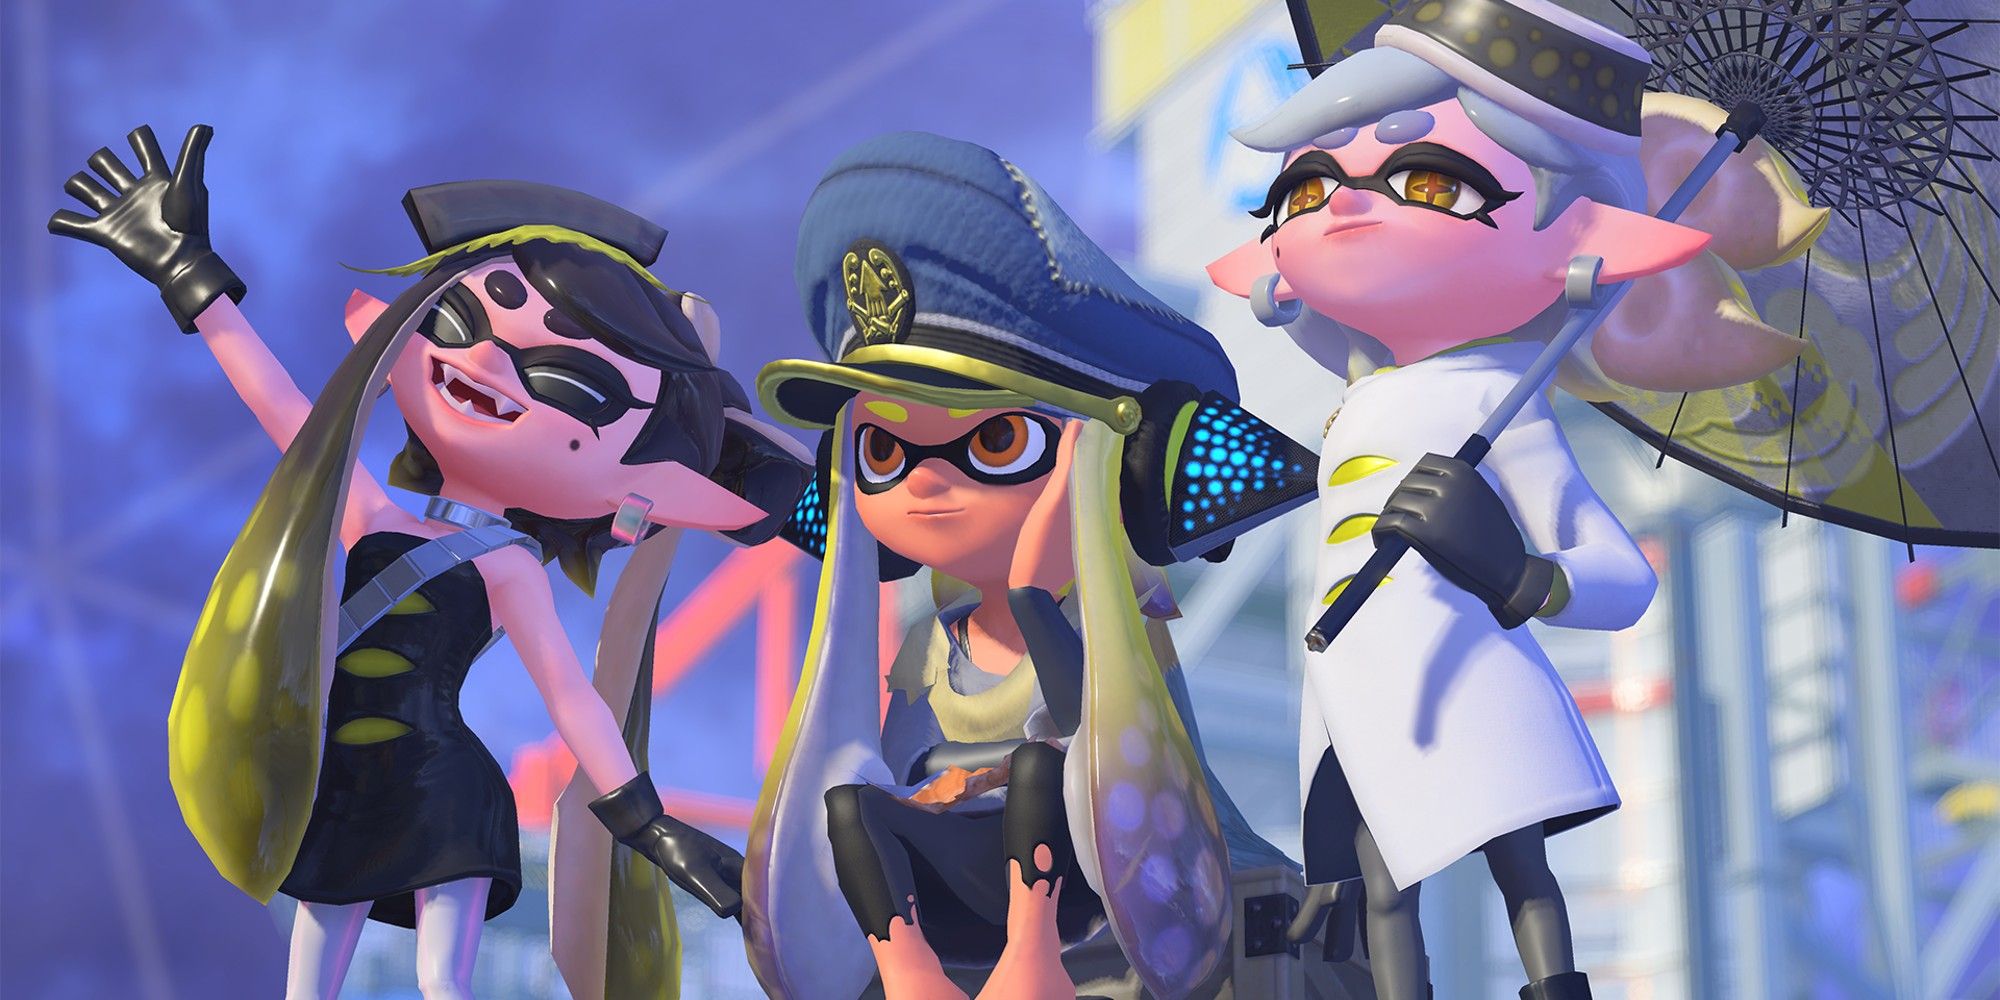 Splatoon 3 Callie and Marie and the player